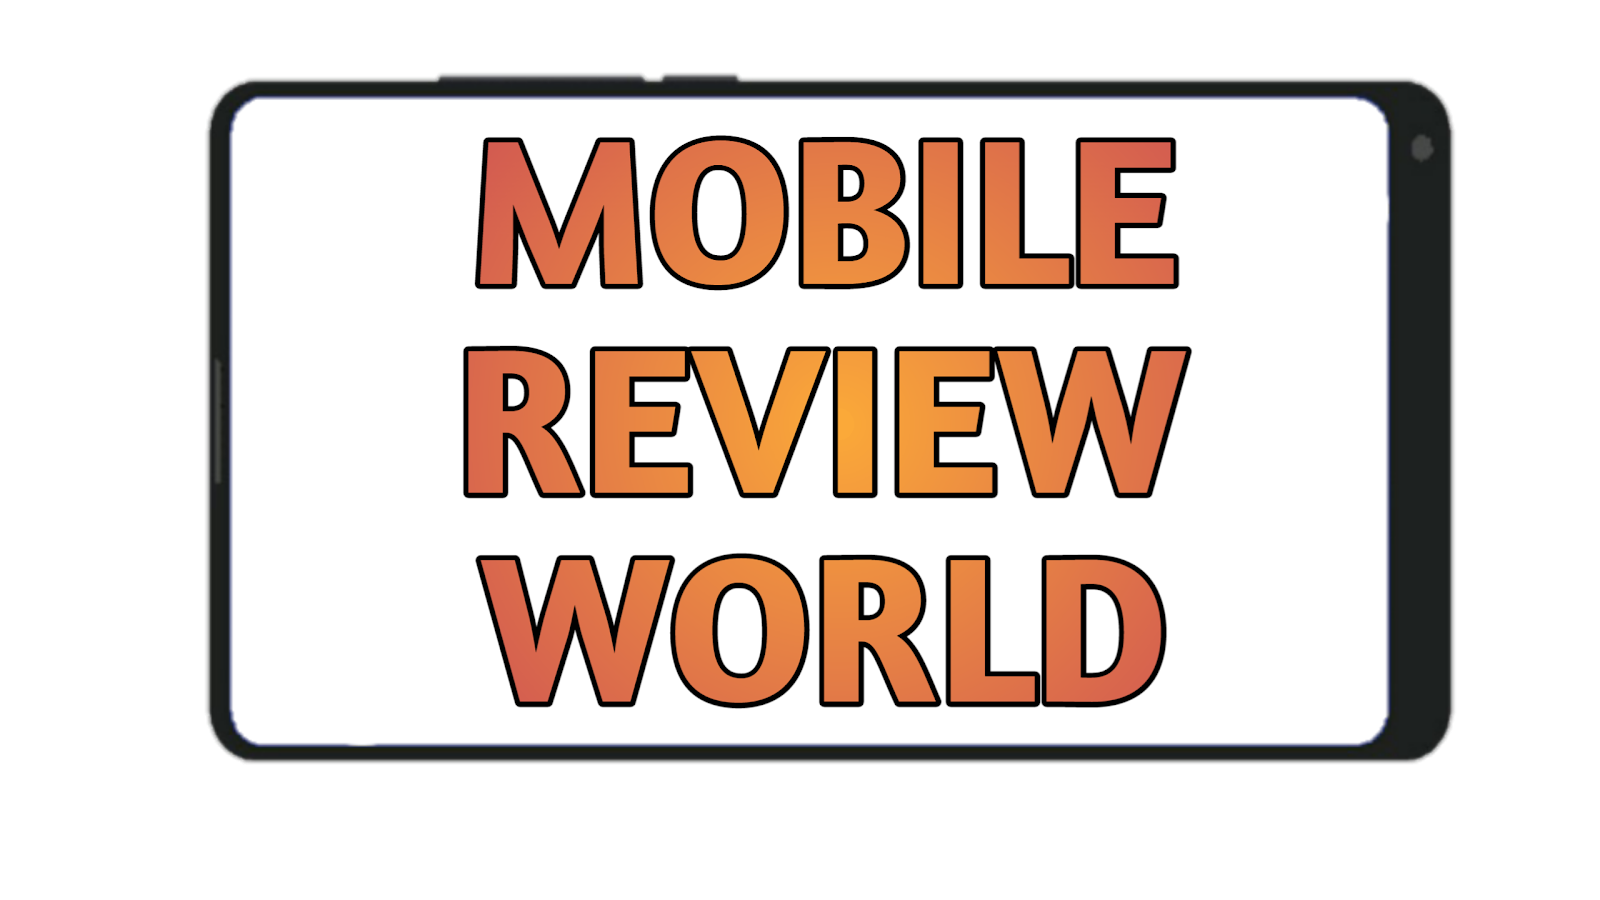 mobilereviewworld786.blogspot.com-The ultimate resource for mobile phone,GSM handset,Iphone news